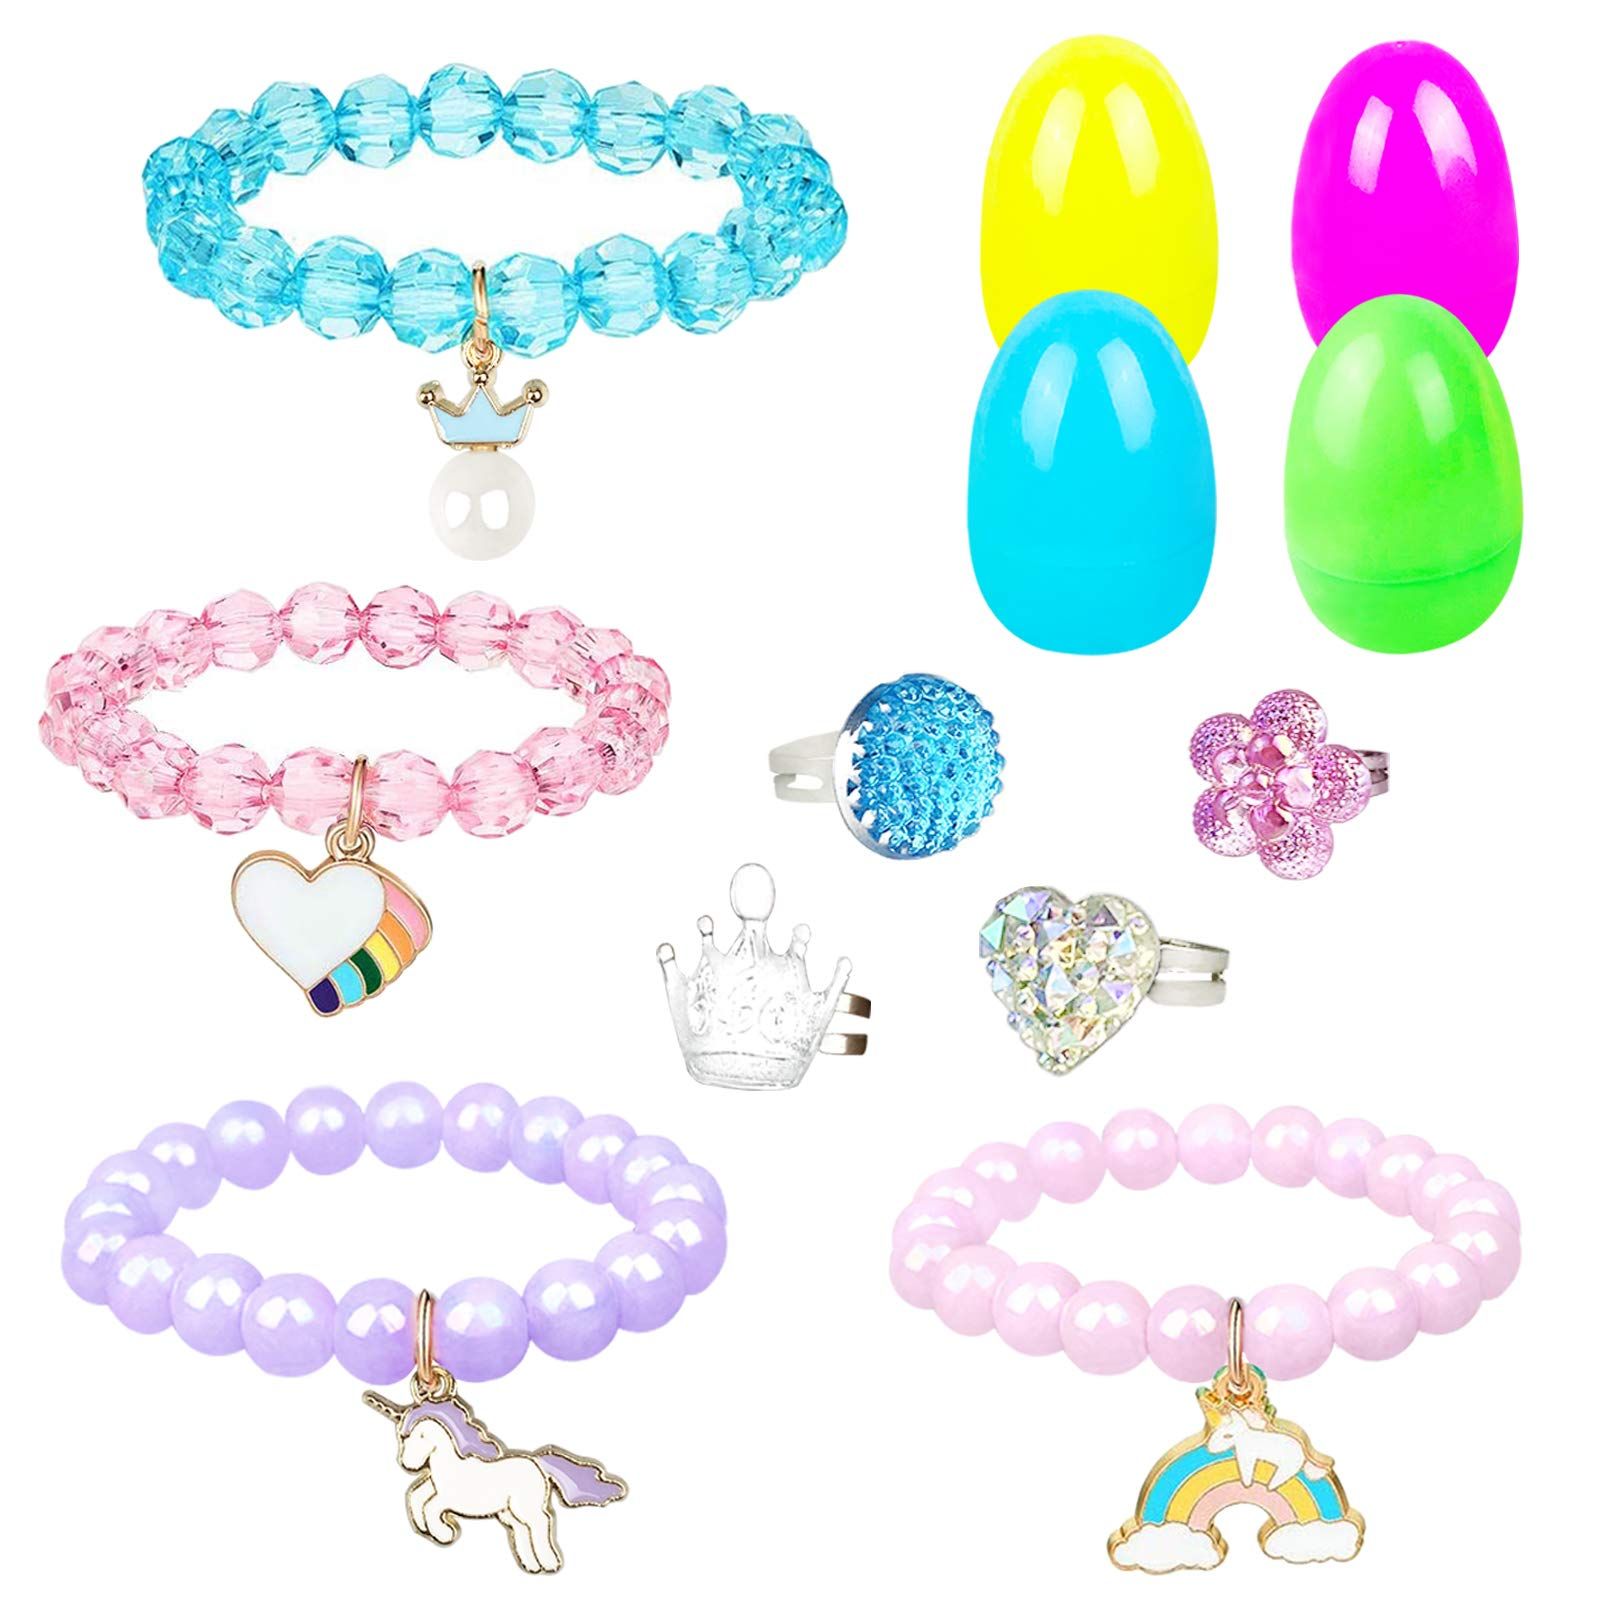 Easter Eggs Easter Basket Stuffers Fillers Filled 4 Pack Eggs with Colorful Bracelet Girls Inside, C | Amazon (US)